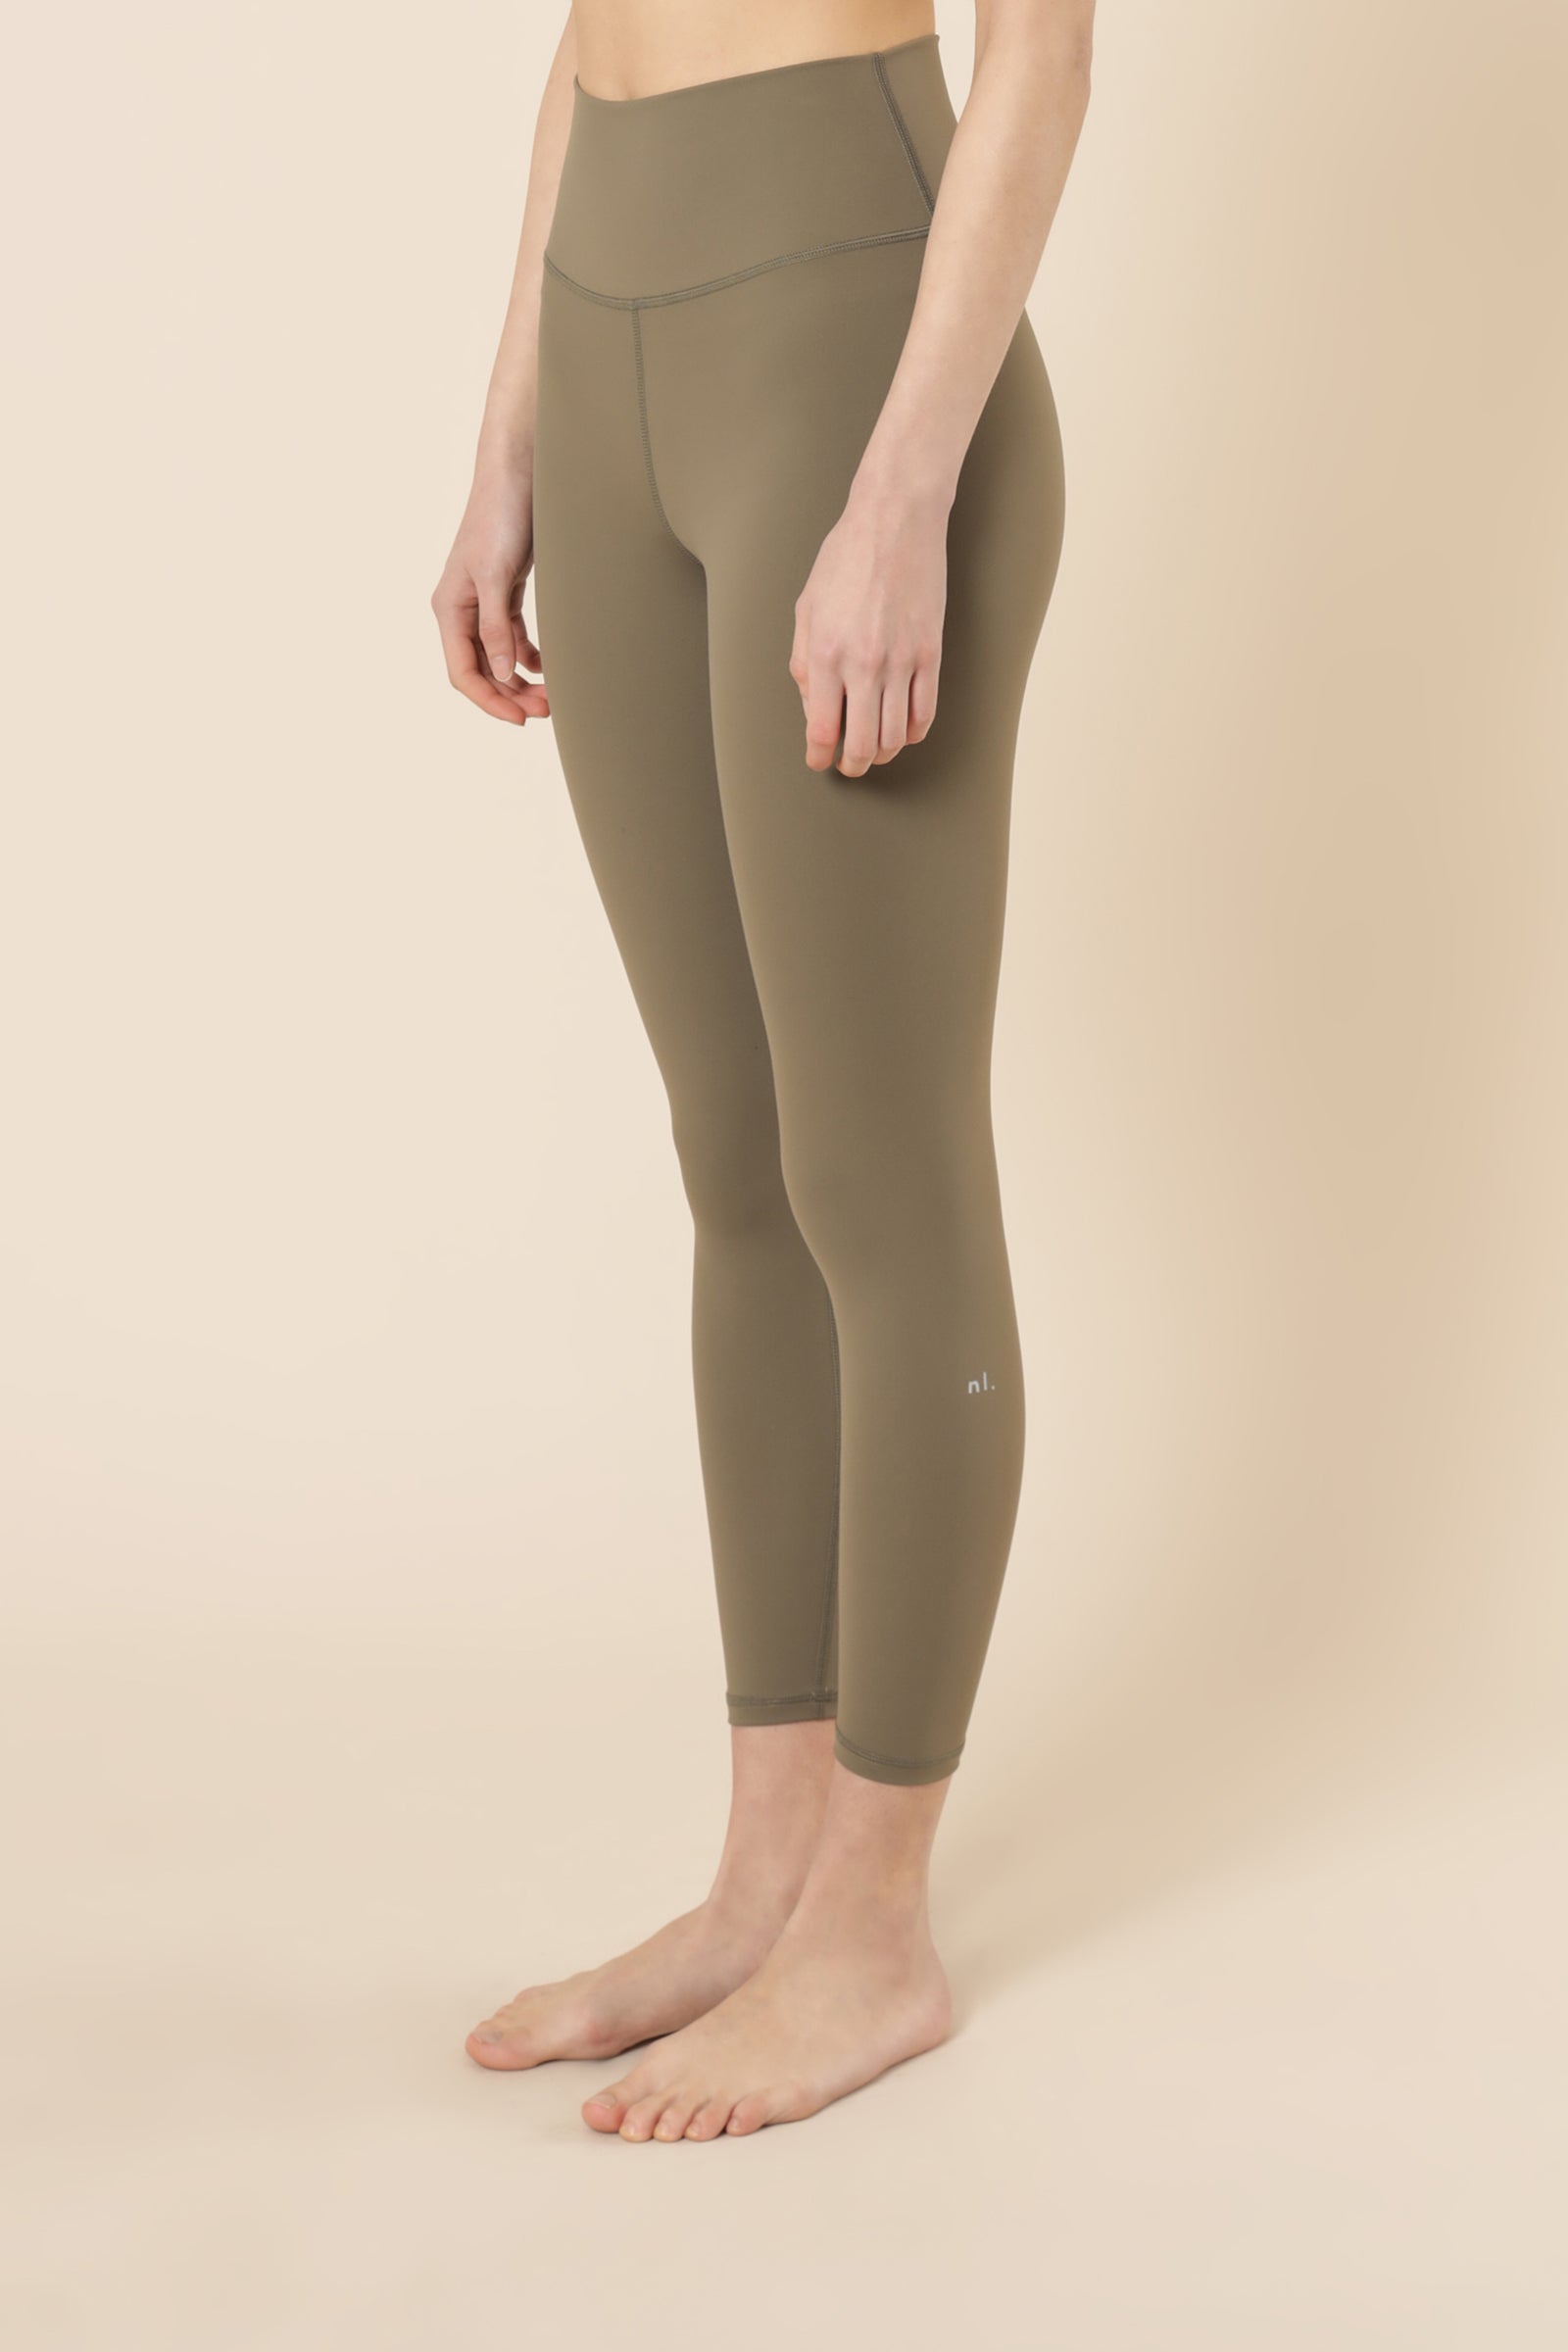 Nude Lucy nude active 7 8 tights olive pants